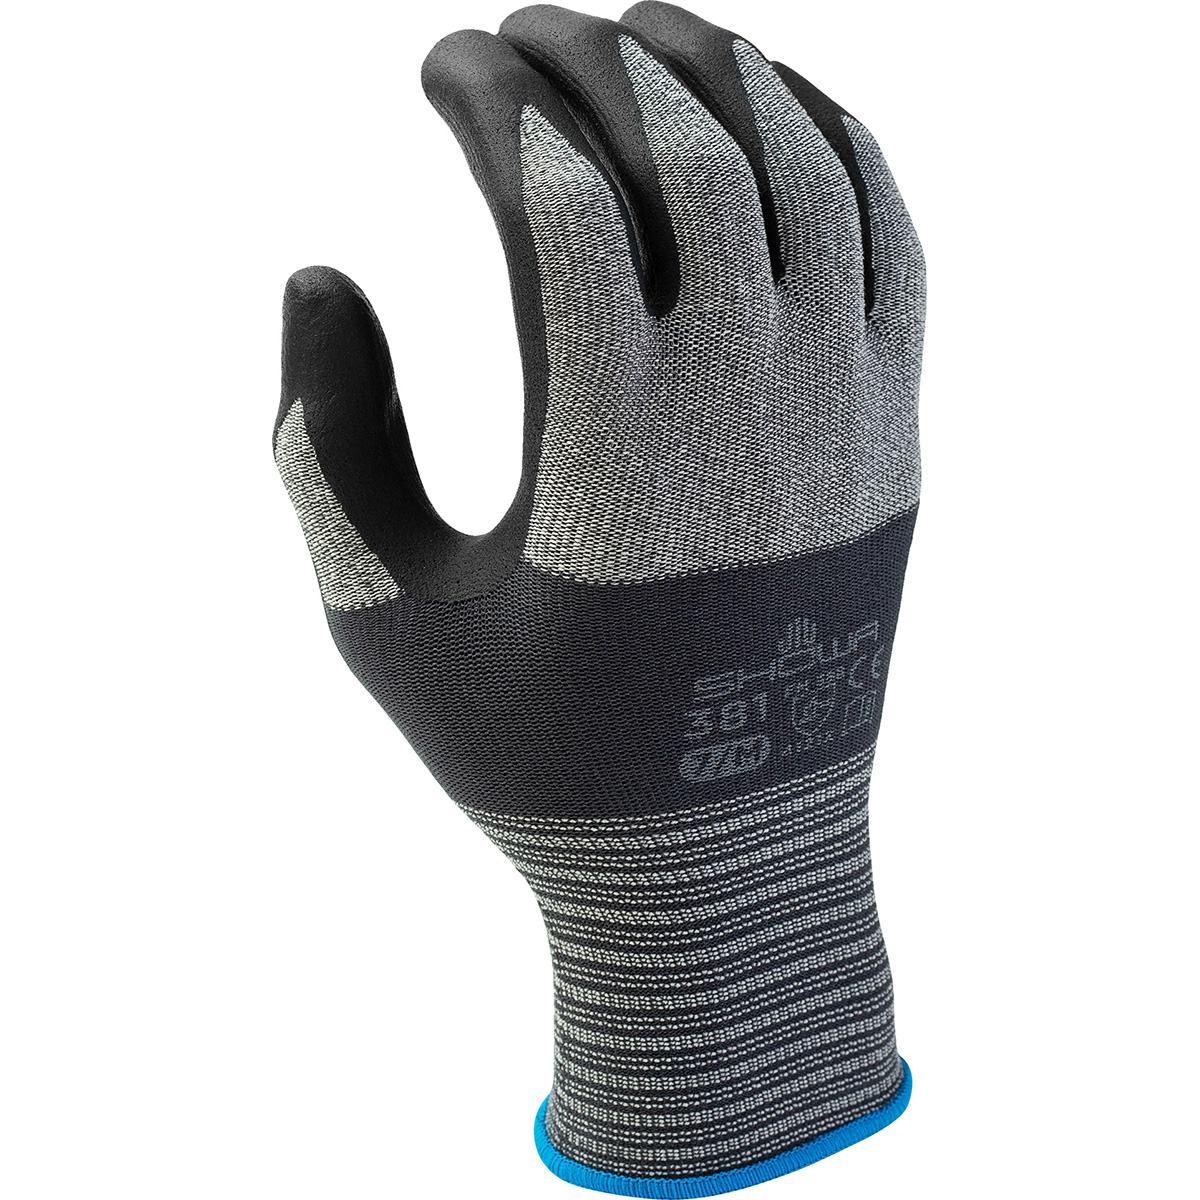 General purpose, "S" pattern foamed nitrile coated, grey /black coating, seamless, breathable microfiber knit liner, extra large